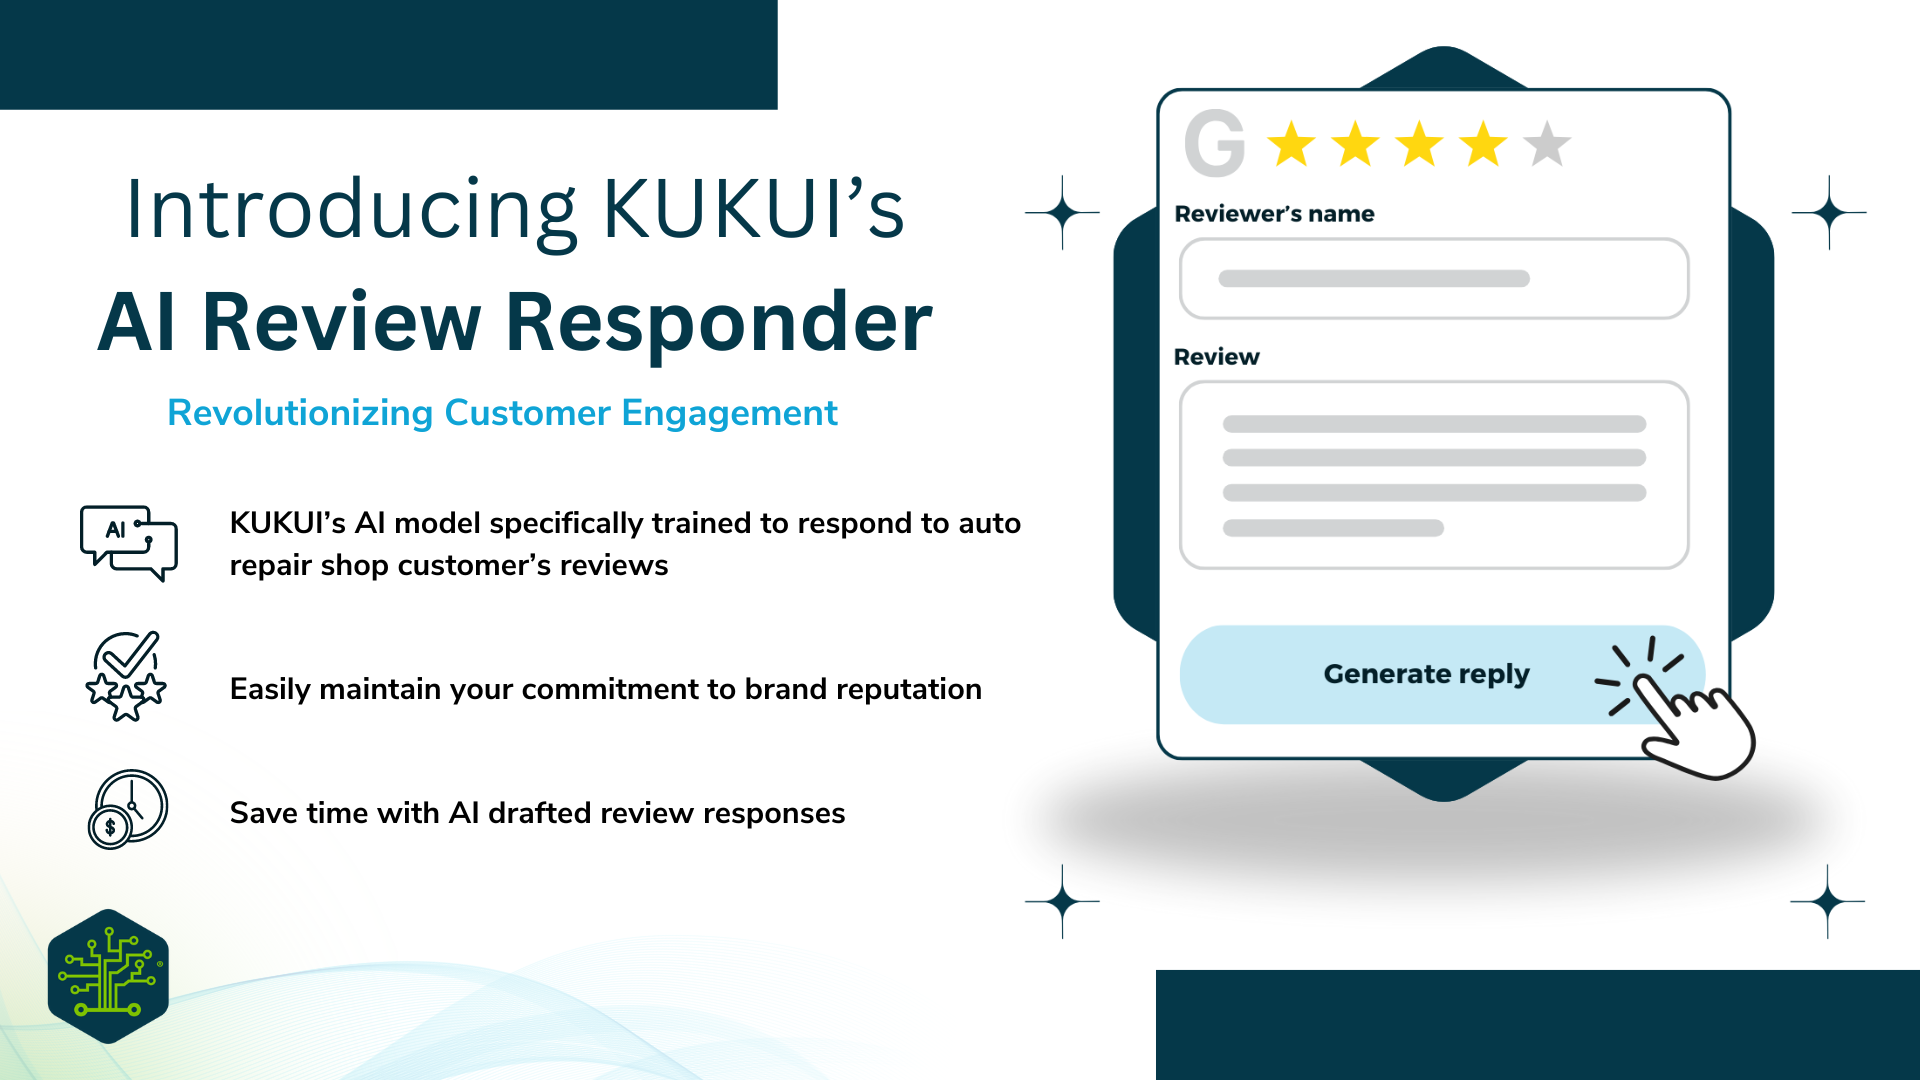 An advertisement for KUKUI 's AI Review Responder.